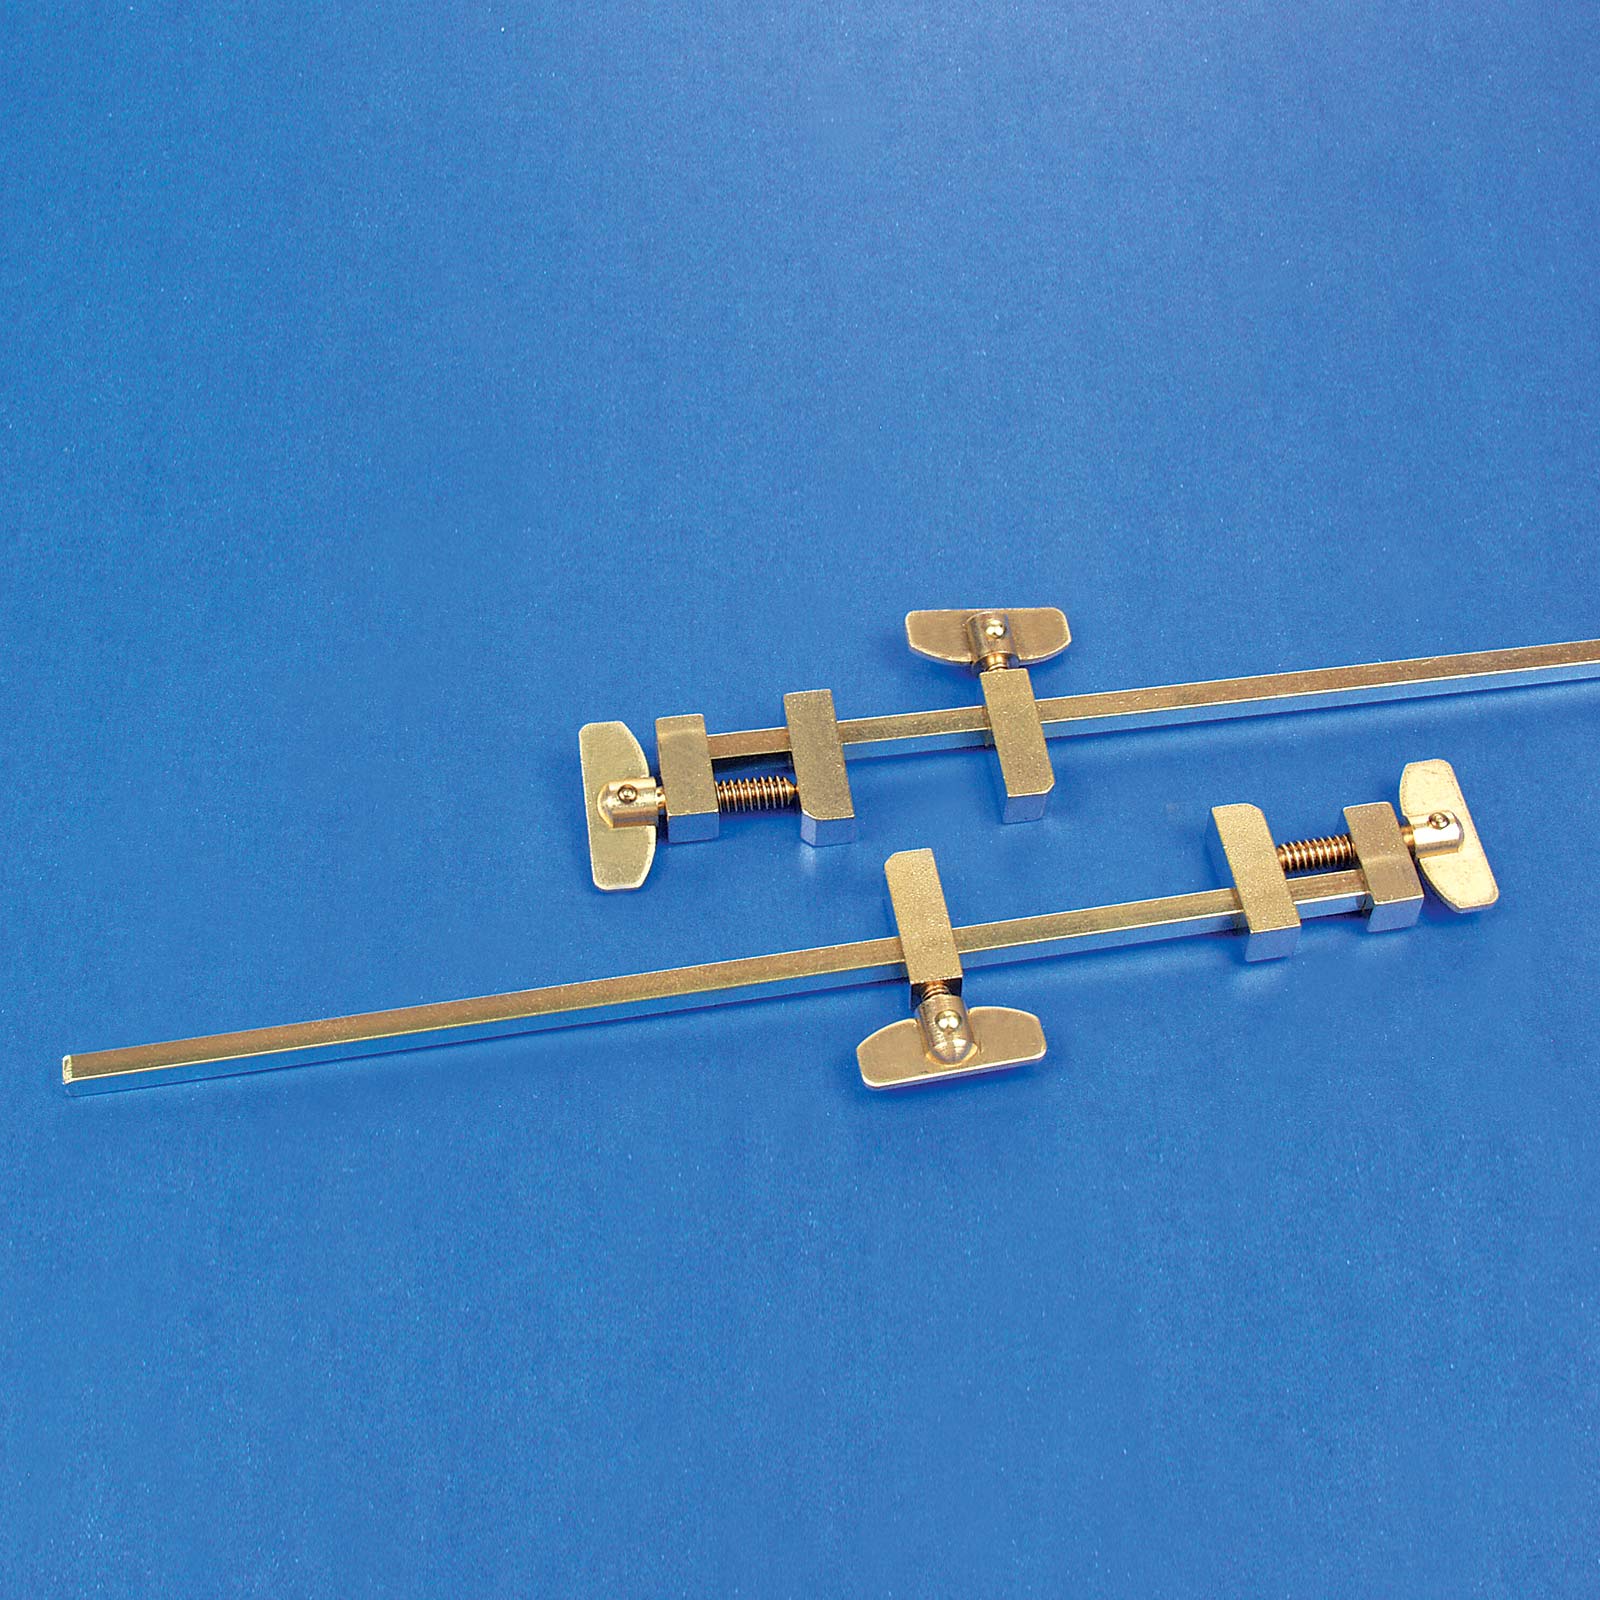 Solid Brass Miniature Bar Clamps, 7 Inches Long (Set of 2)